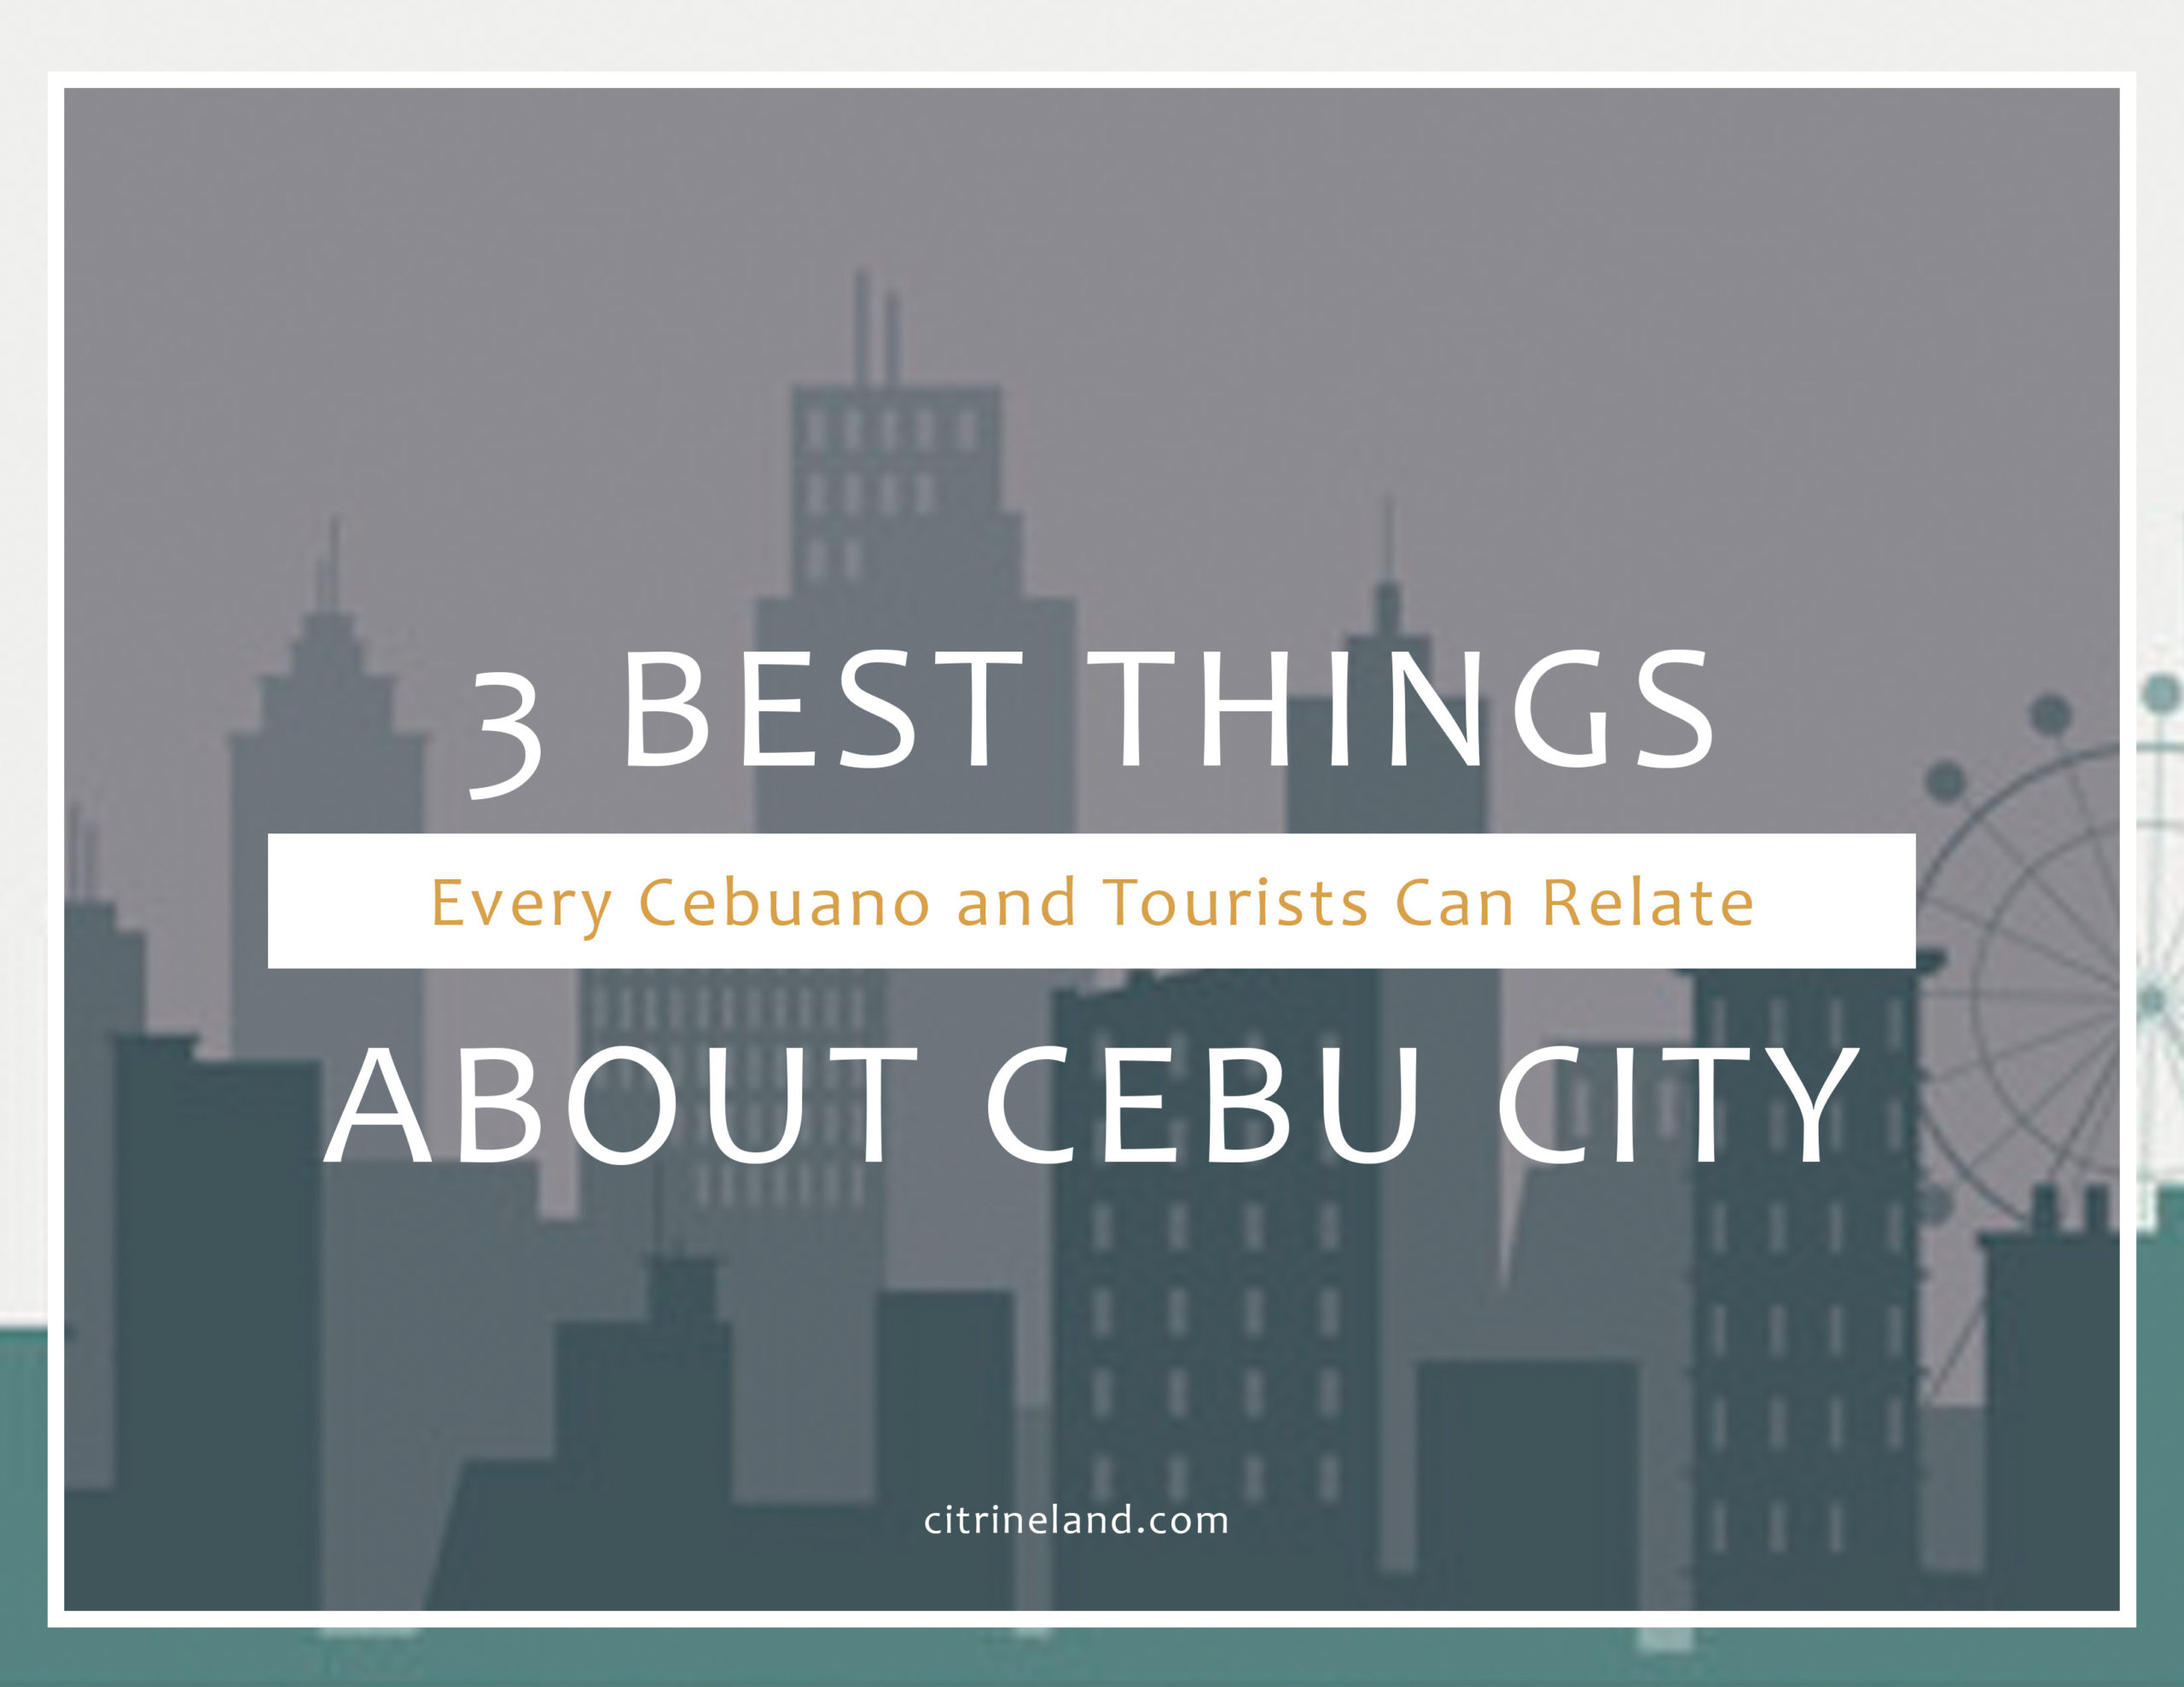 Cebu City: 3 Best Things That Every Cebuano Can Relate To